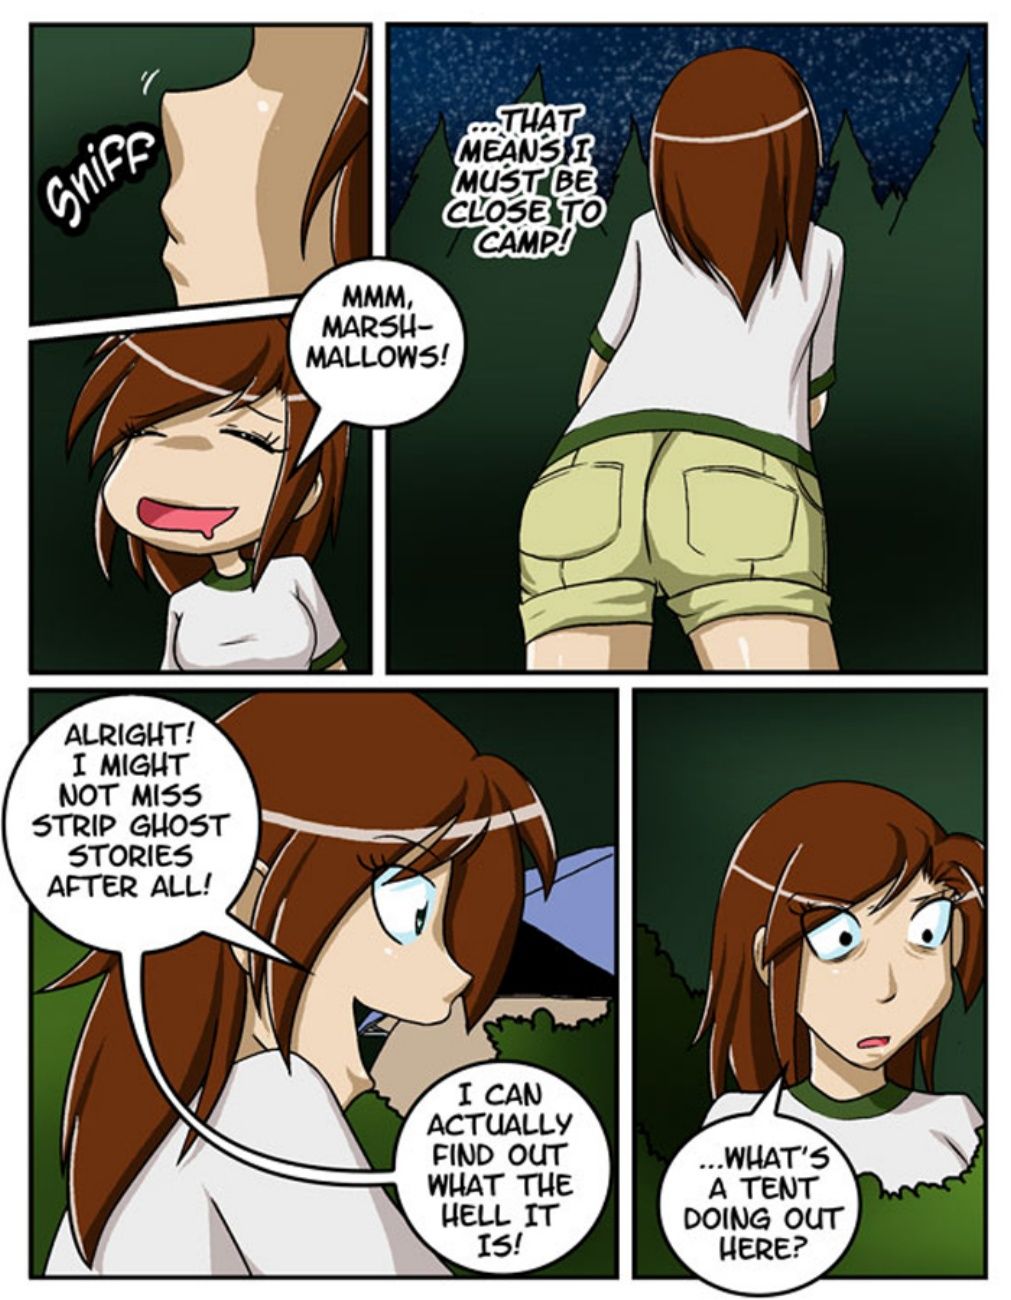 A Date With A Tentacle Monster 6 - Tentacle Summer Camp Part 1 page 19